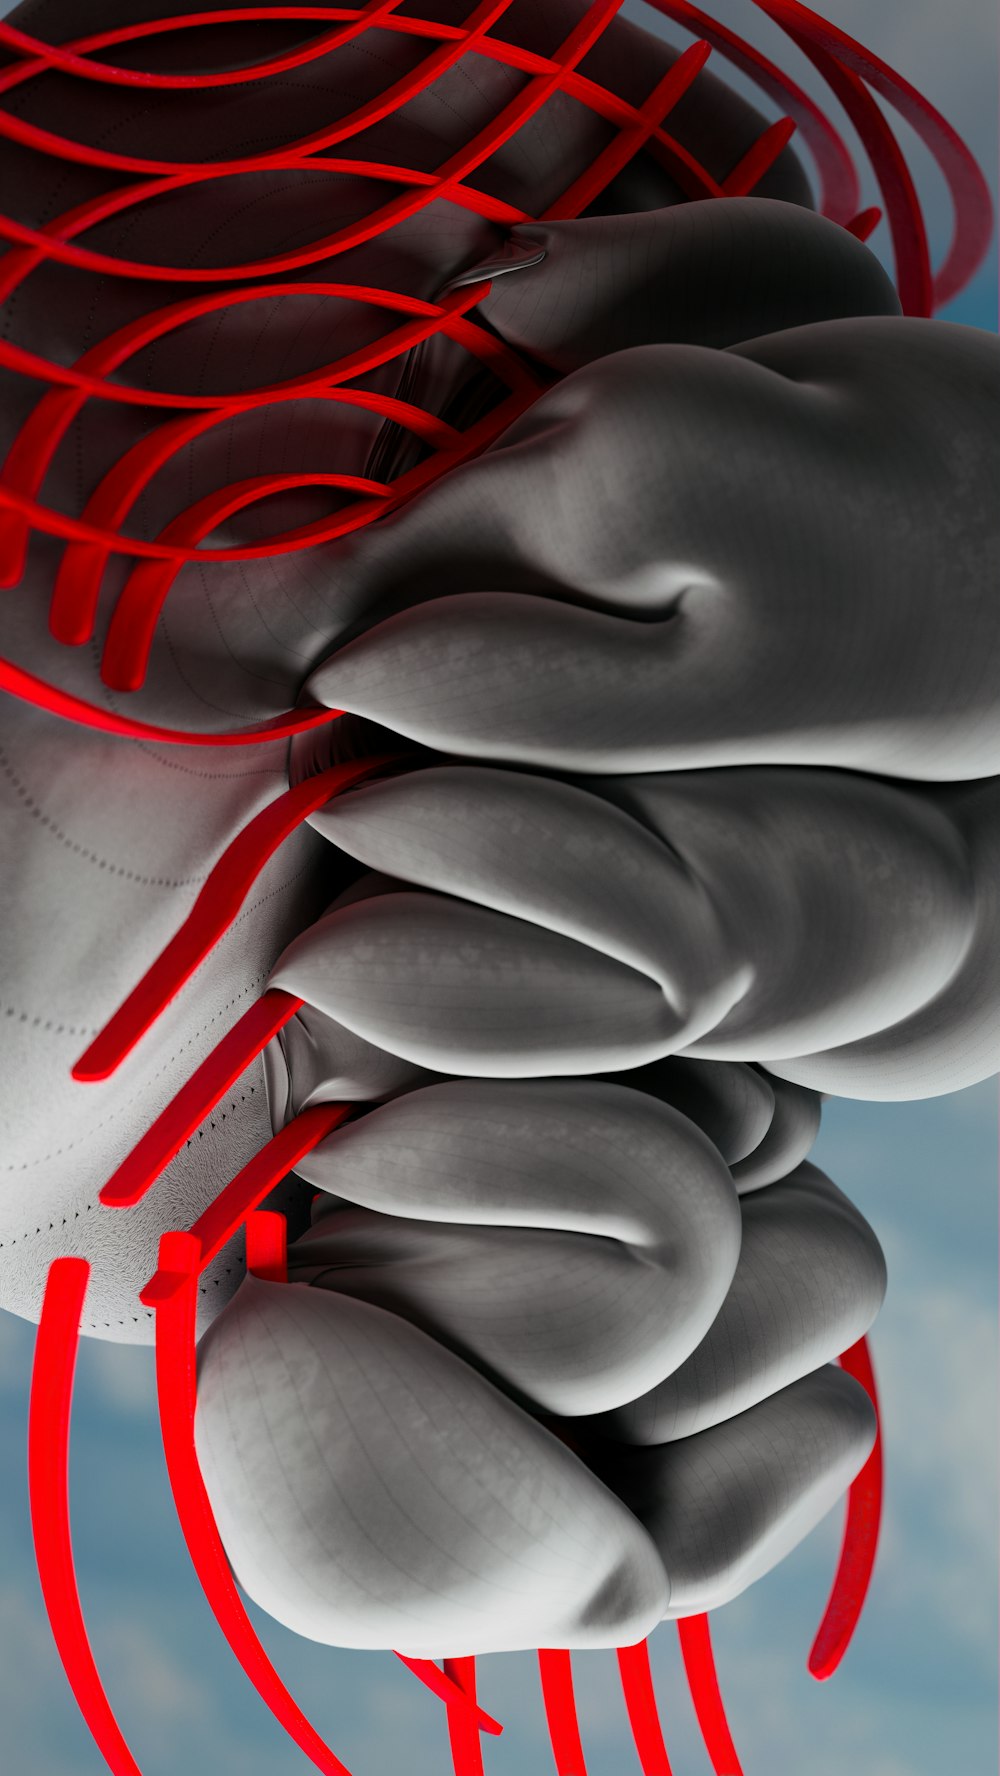 a close up of a hand holding a red object